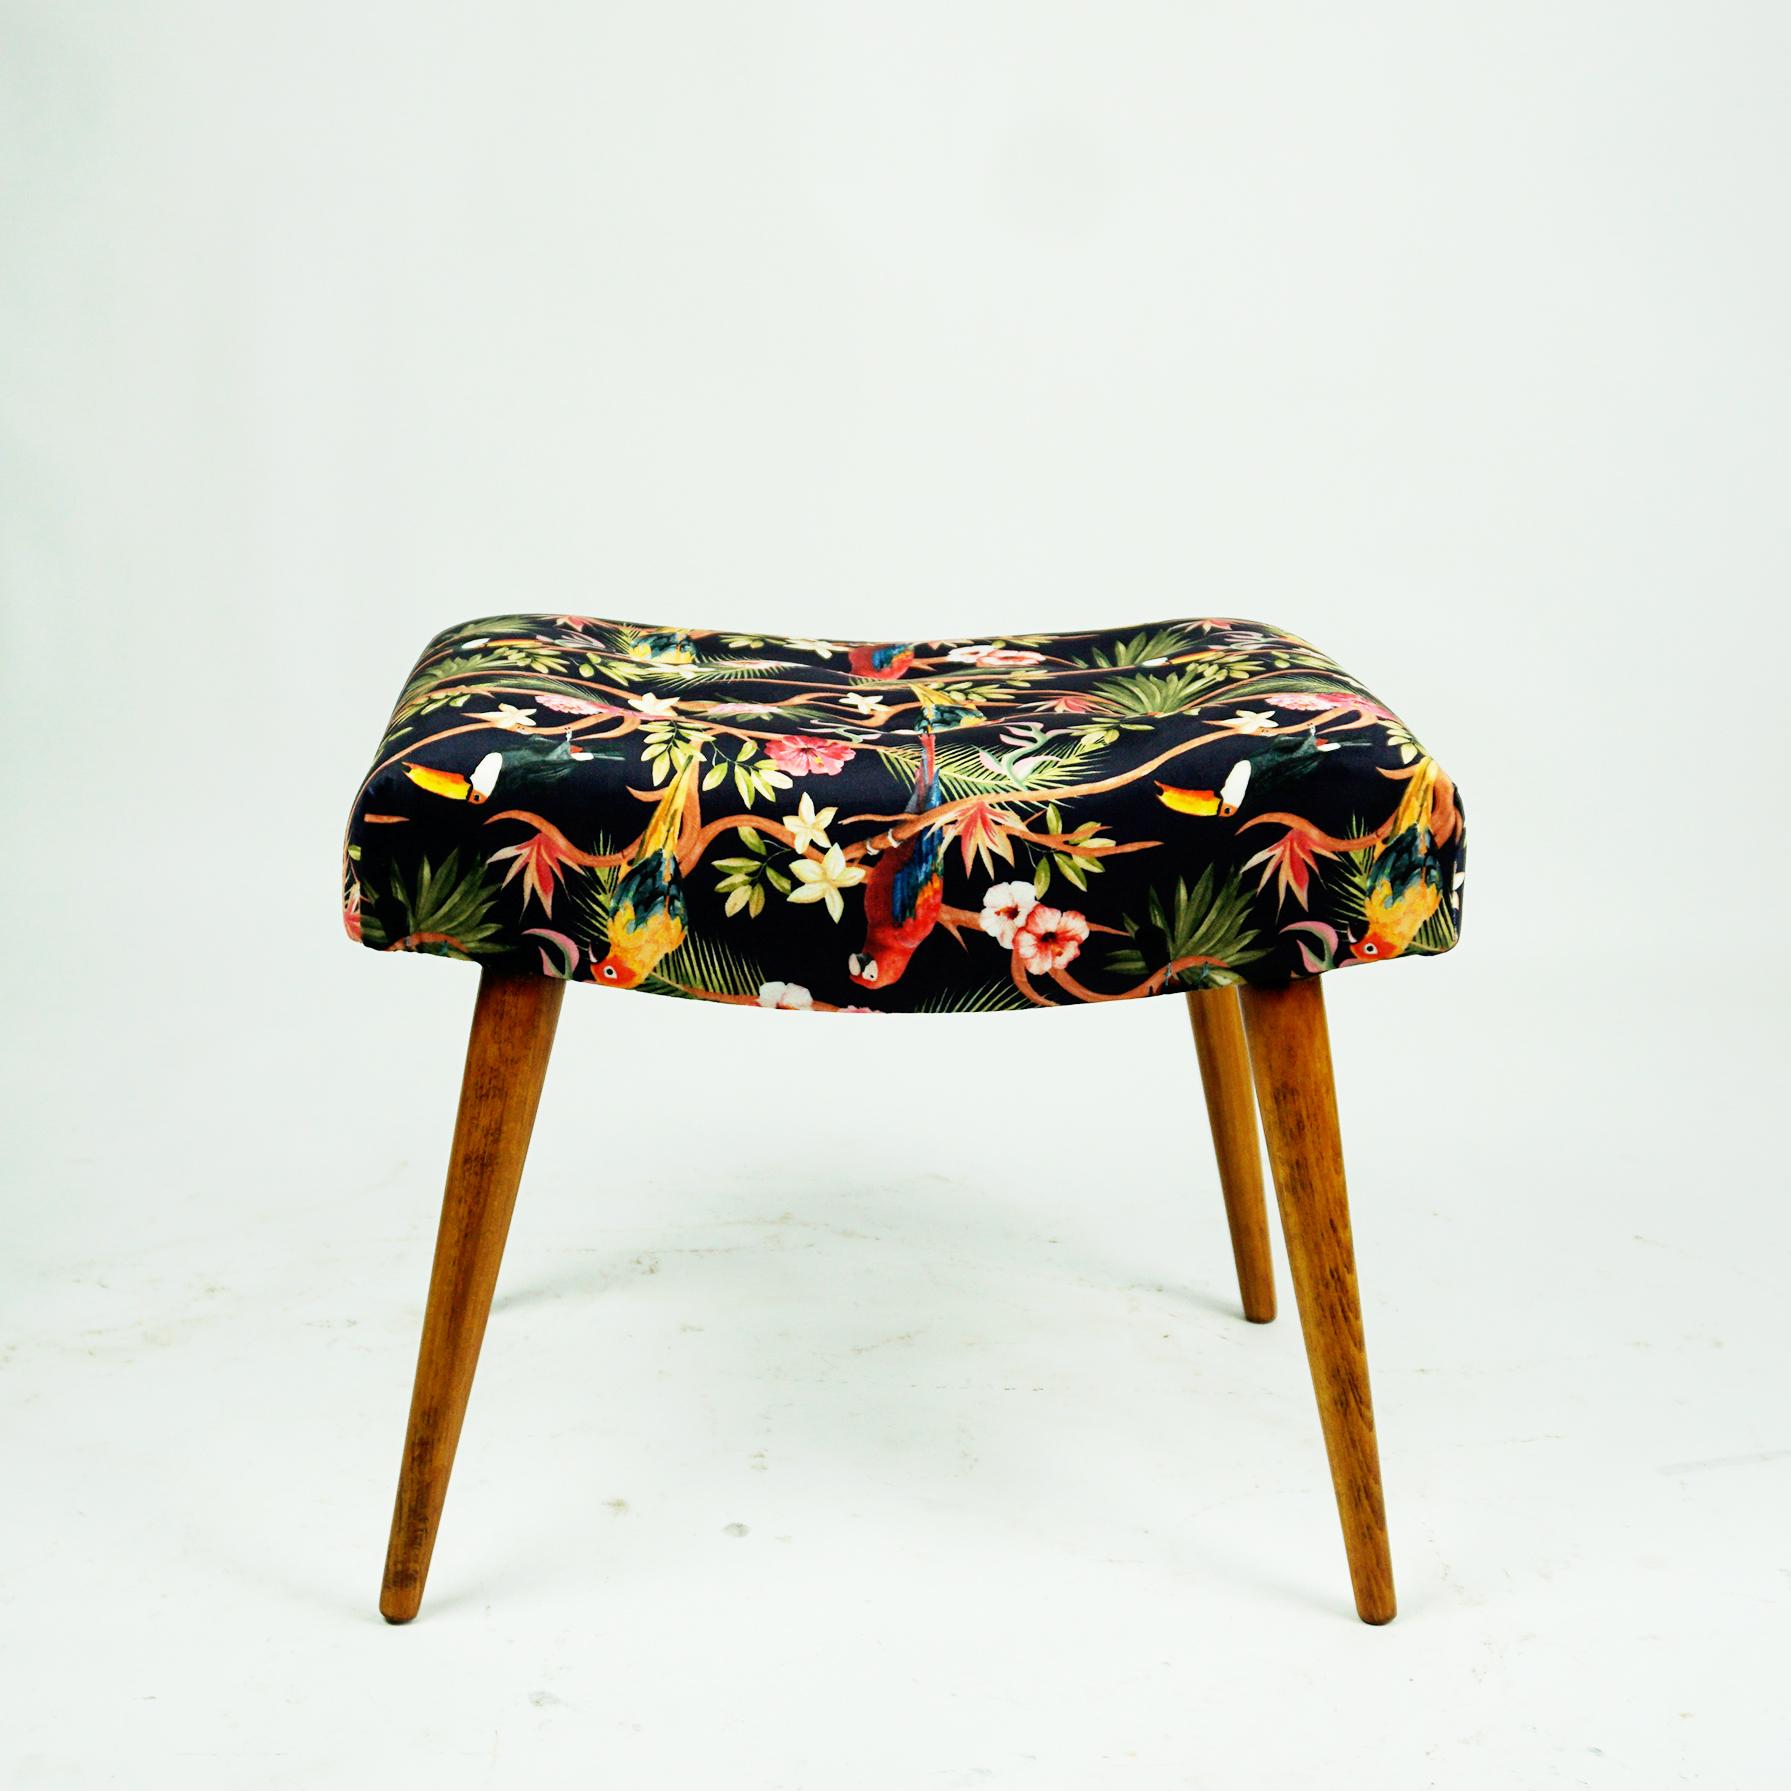 Offered is a charming Mid-Century Modern beechwood stool, ottoman or pouf that is newly upholstered in black and multicolored velvet with flowers and birds ornaments. It has slightly tapered steel legs and has been newly upholstered. It will be a